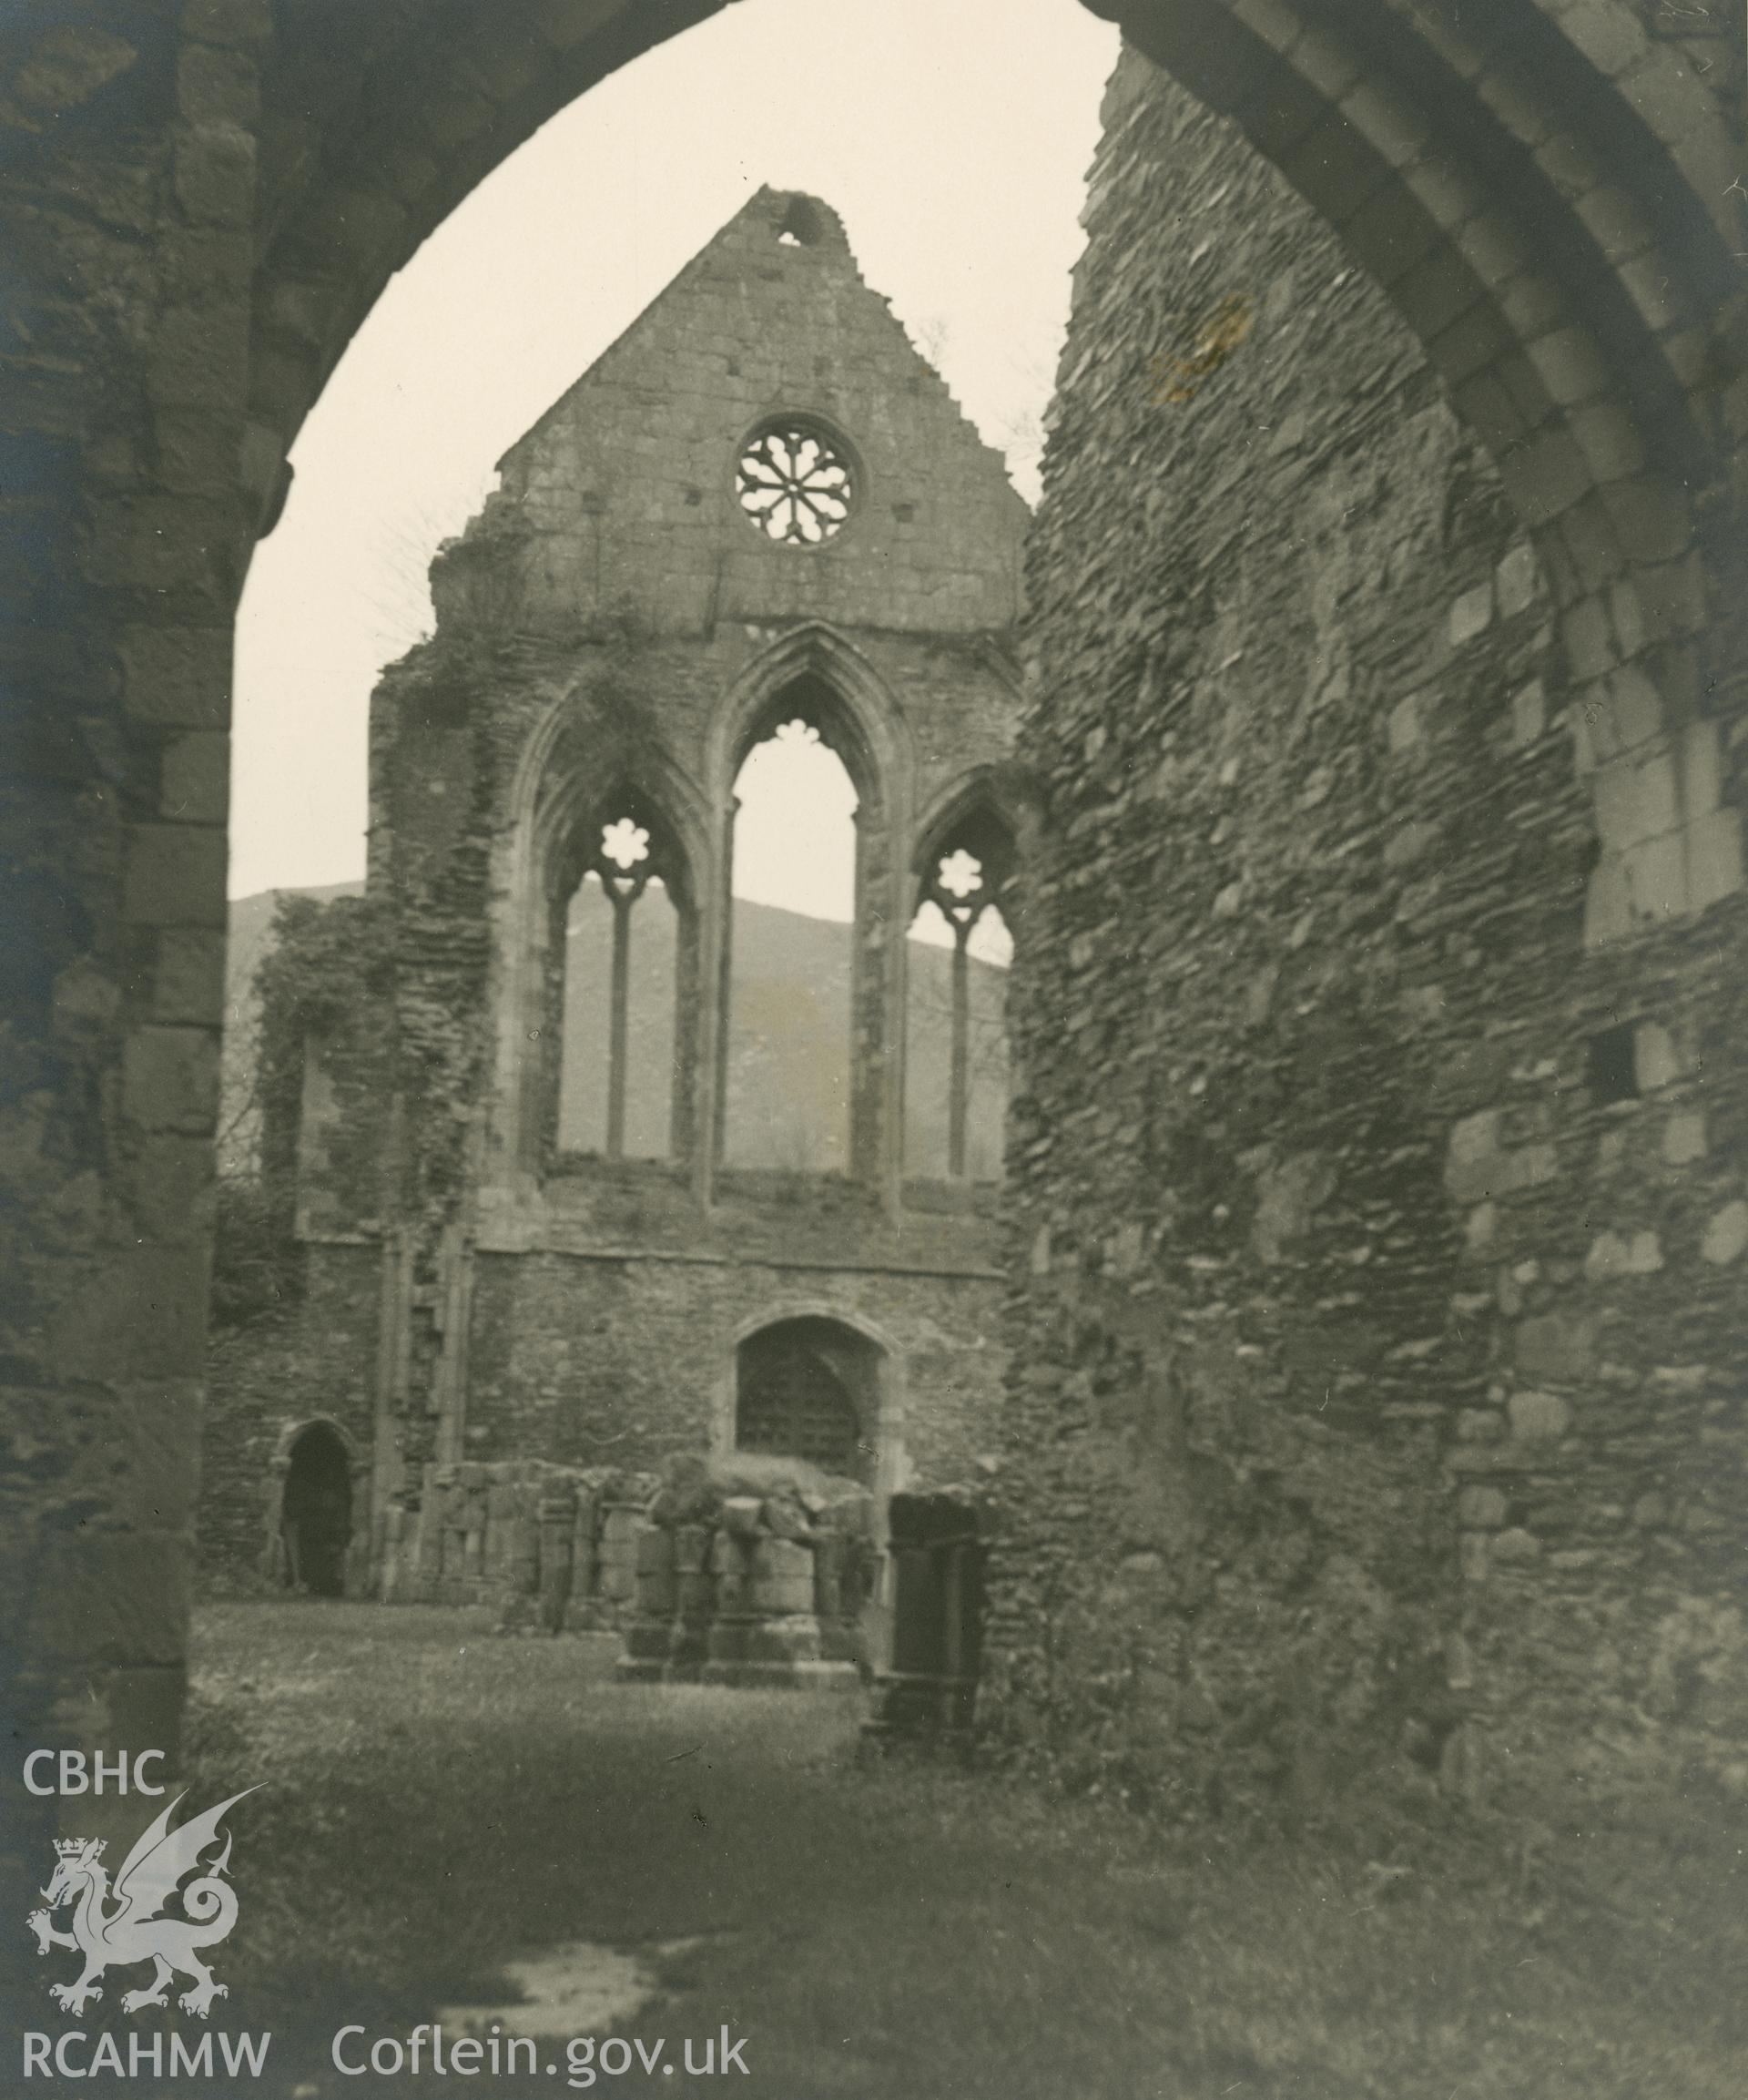 Digitised copy of an exterior view of Valle Crucis, dated 1940.